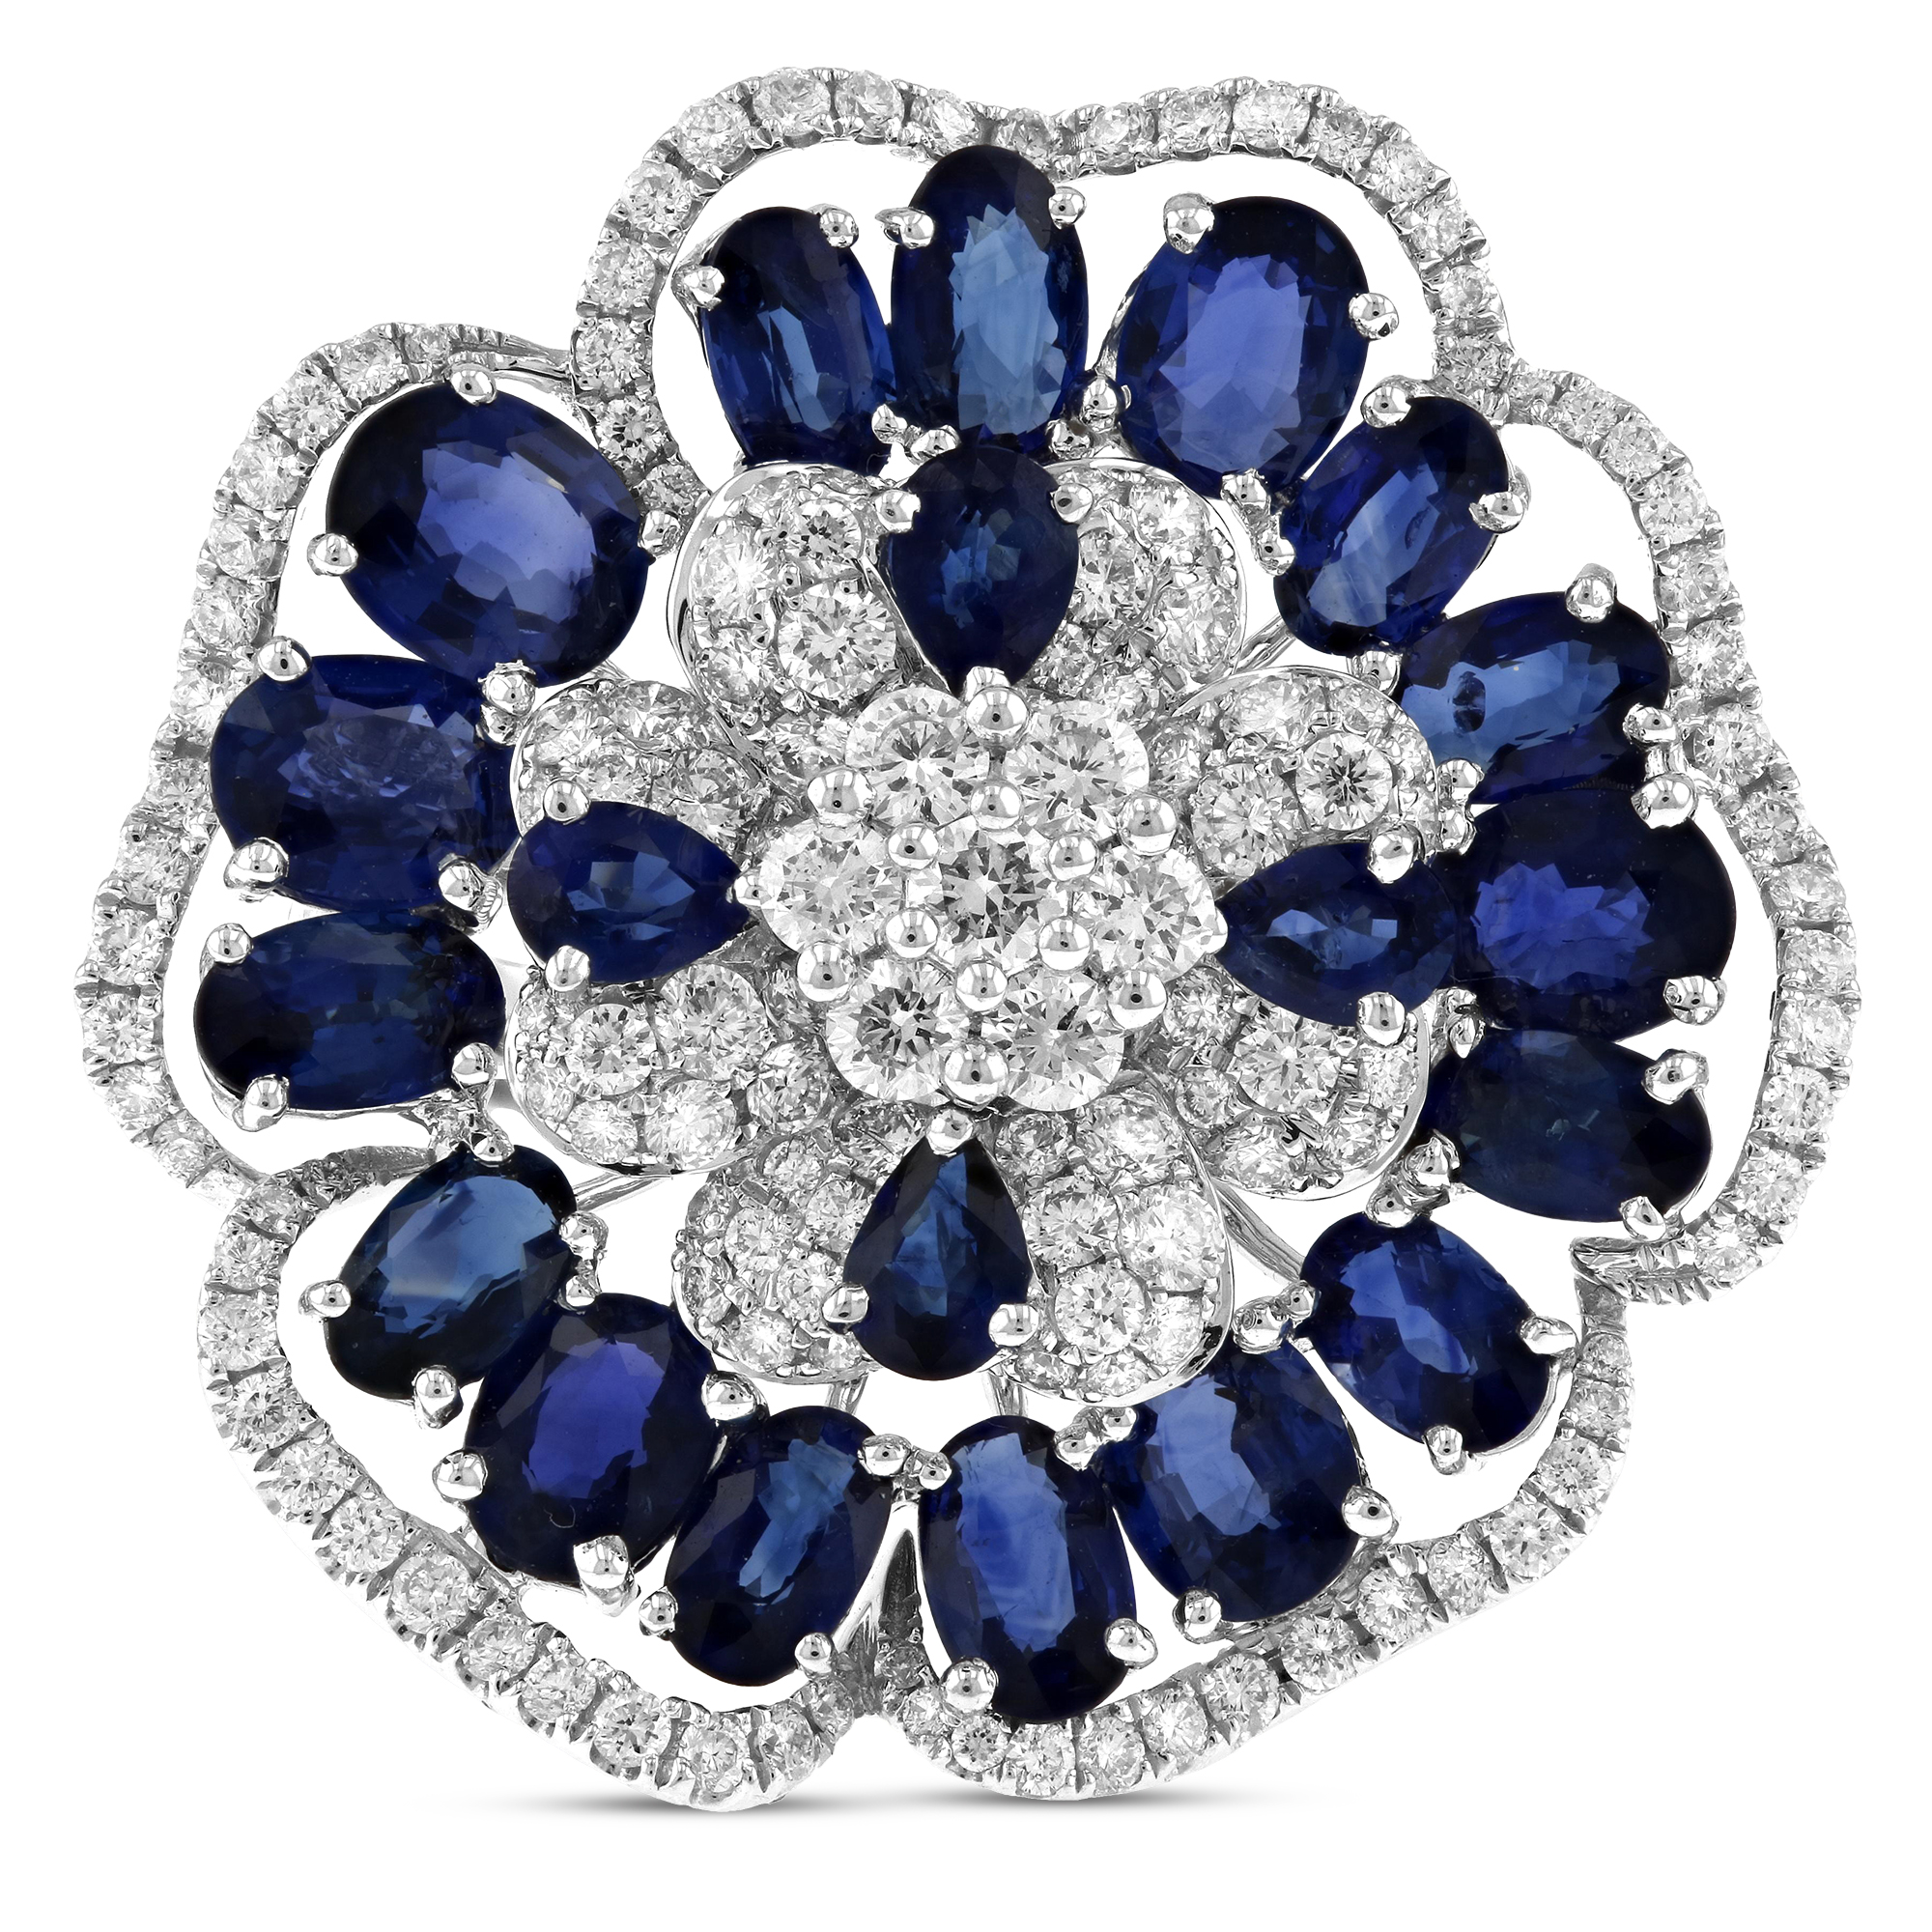 View 7.86ctw Diamond and Sapphire Ring in 18k White Gold